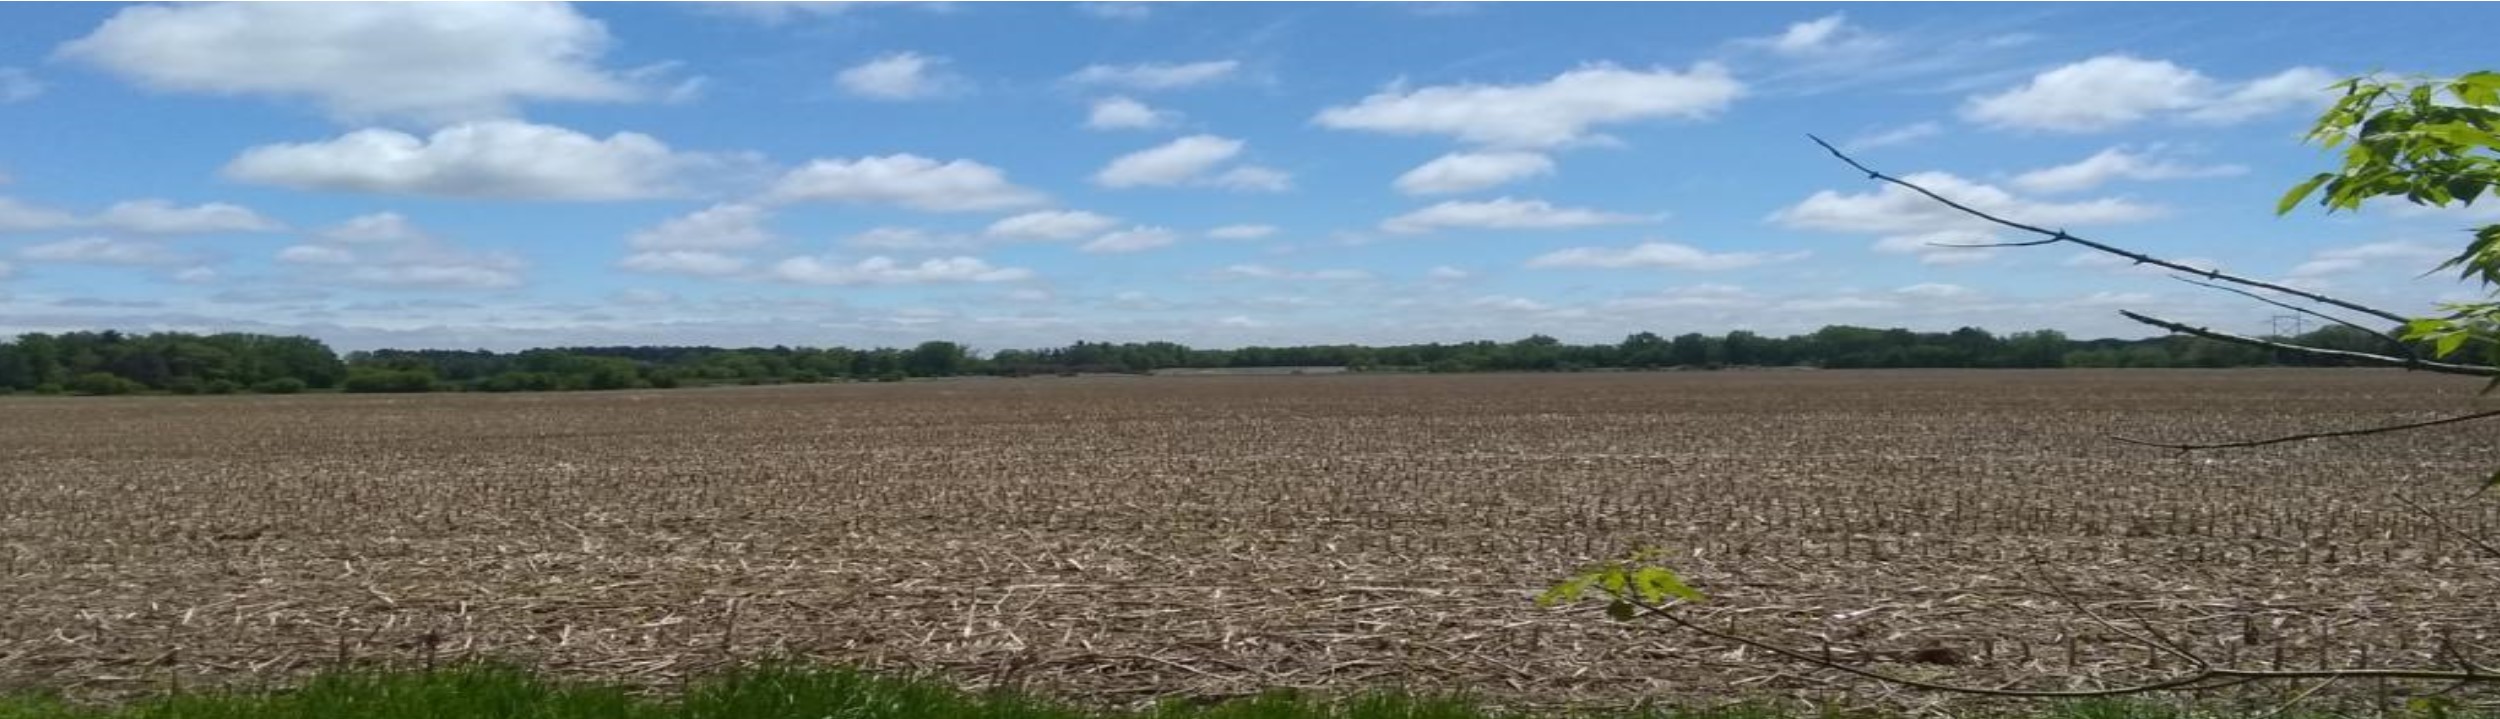 A plowed field with blue sky